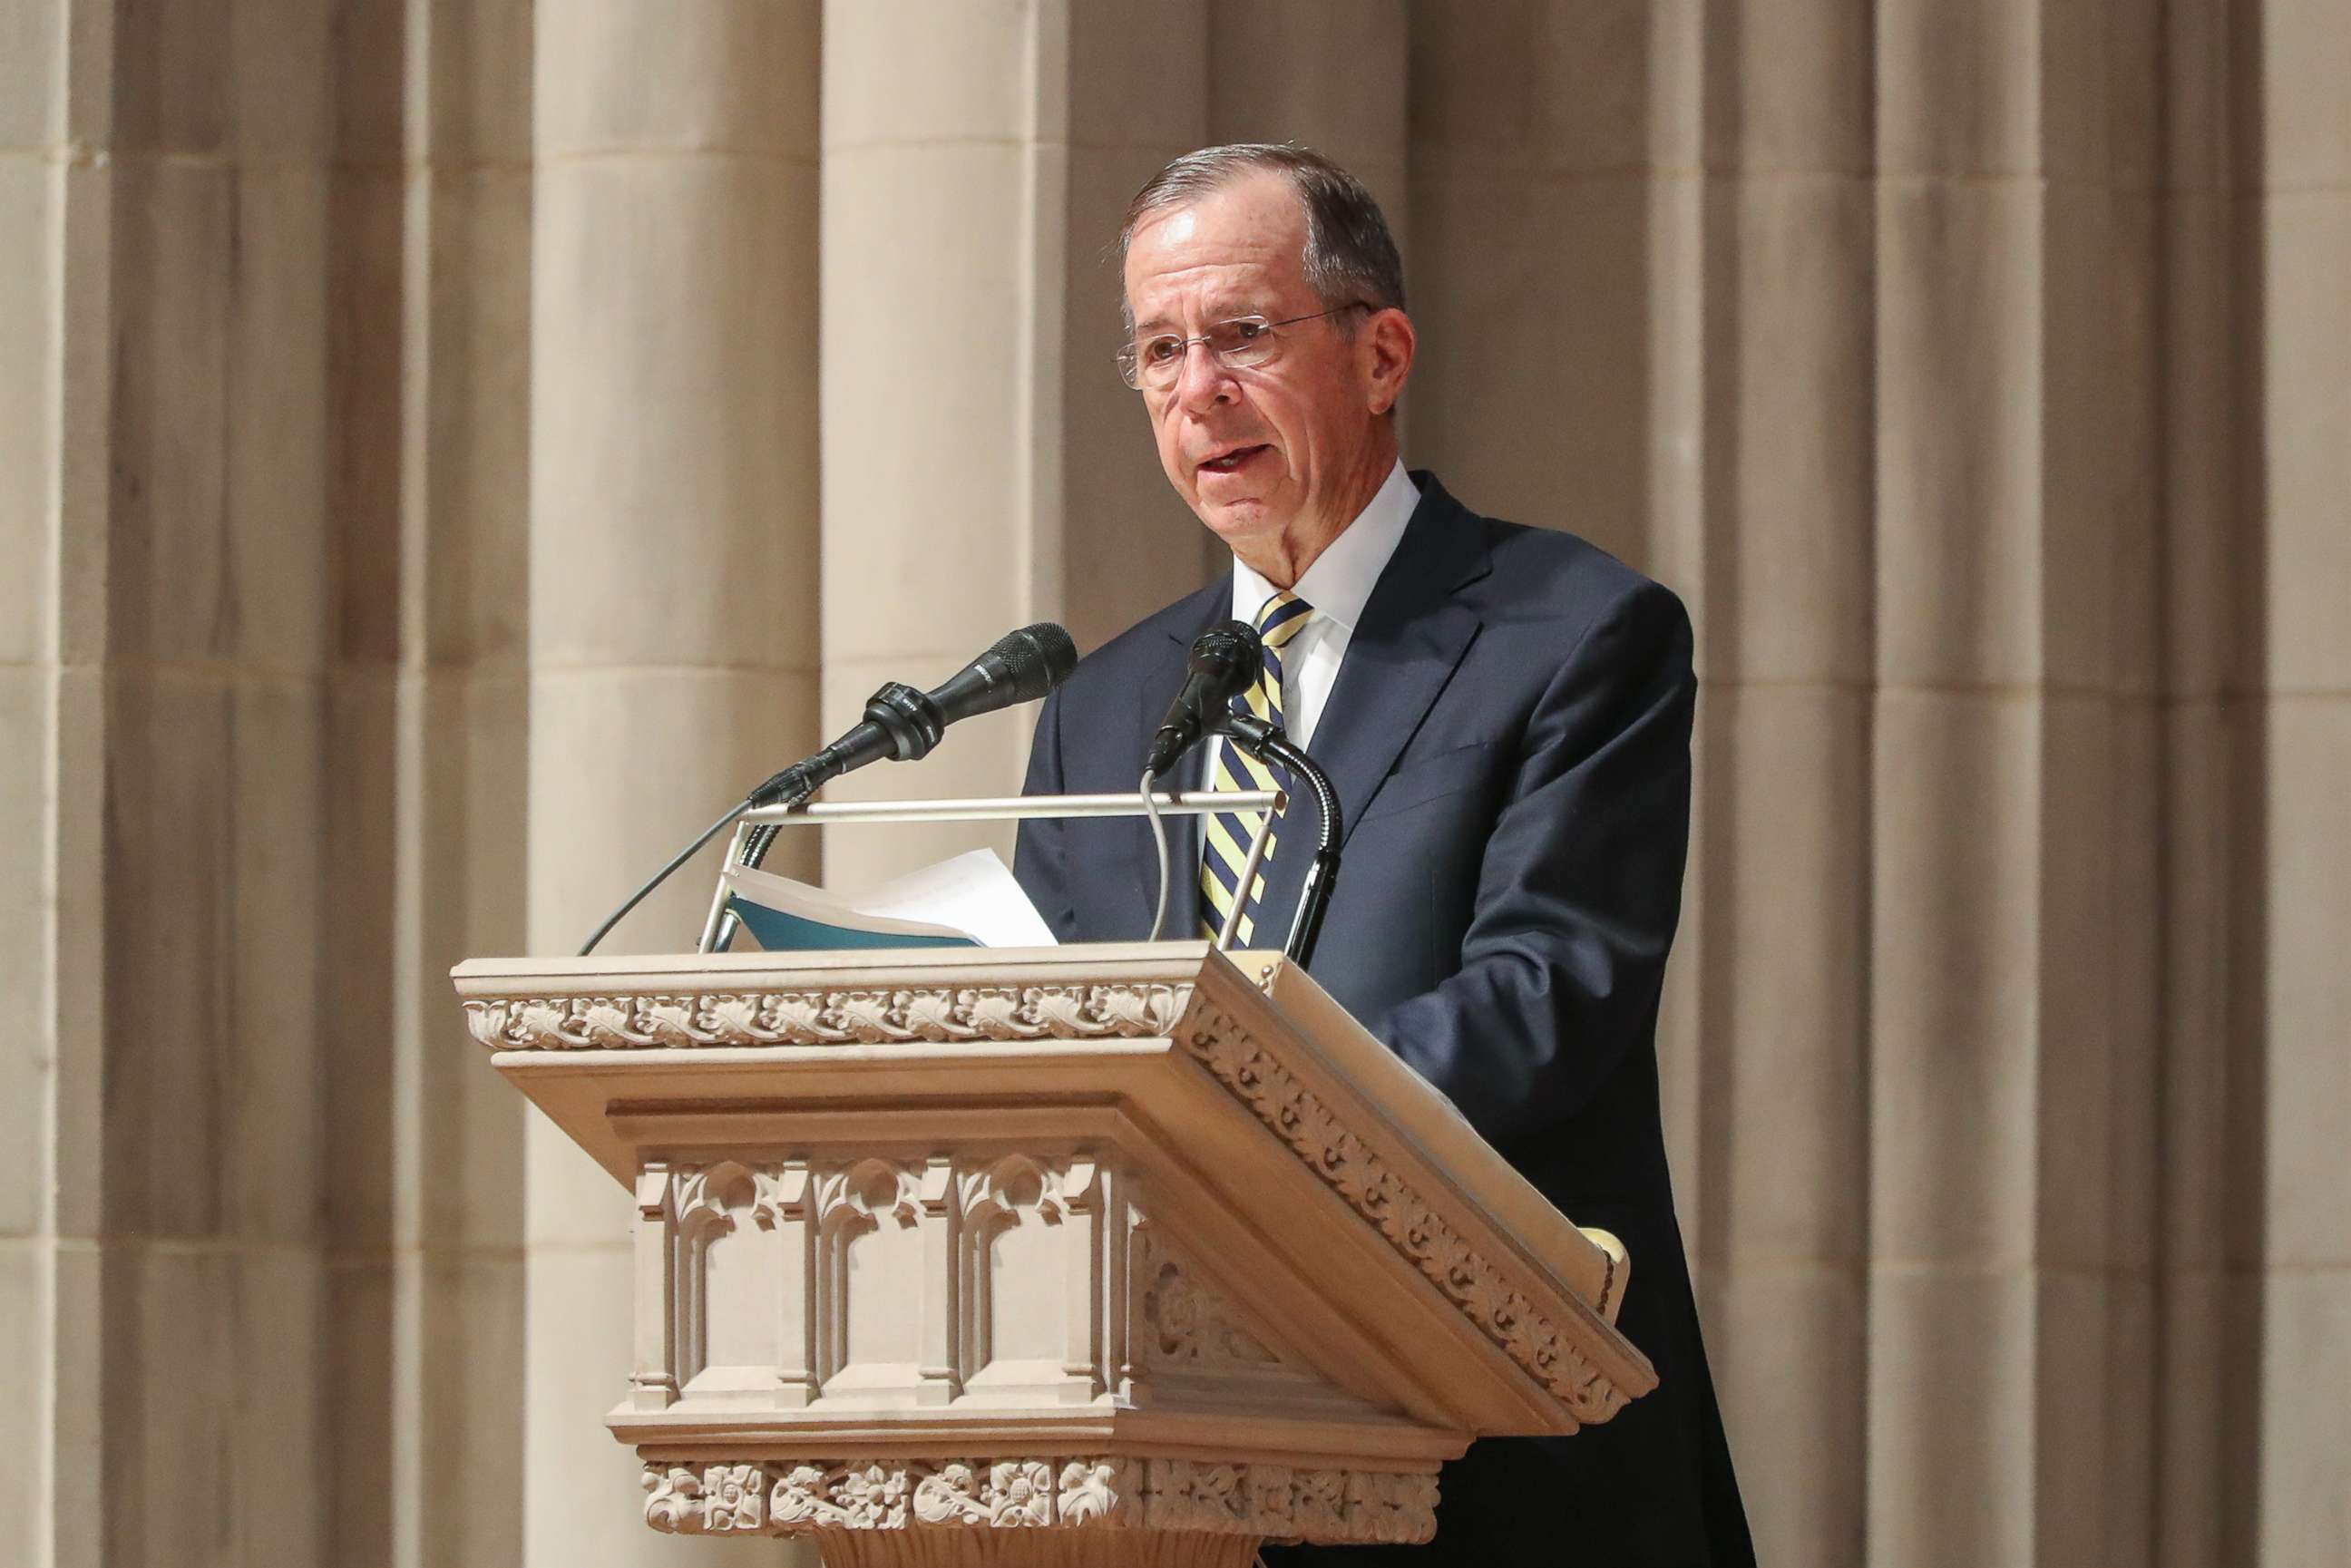 PHOTO: Admiral Michael Mullen, former chairman of the U.S. Joint Chiefs of Staff, speaks during the funeral ceremony of late Senator John Warner at the Washington National Cathedral in Washington, D.C., June 23, 2021.